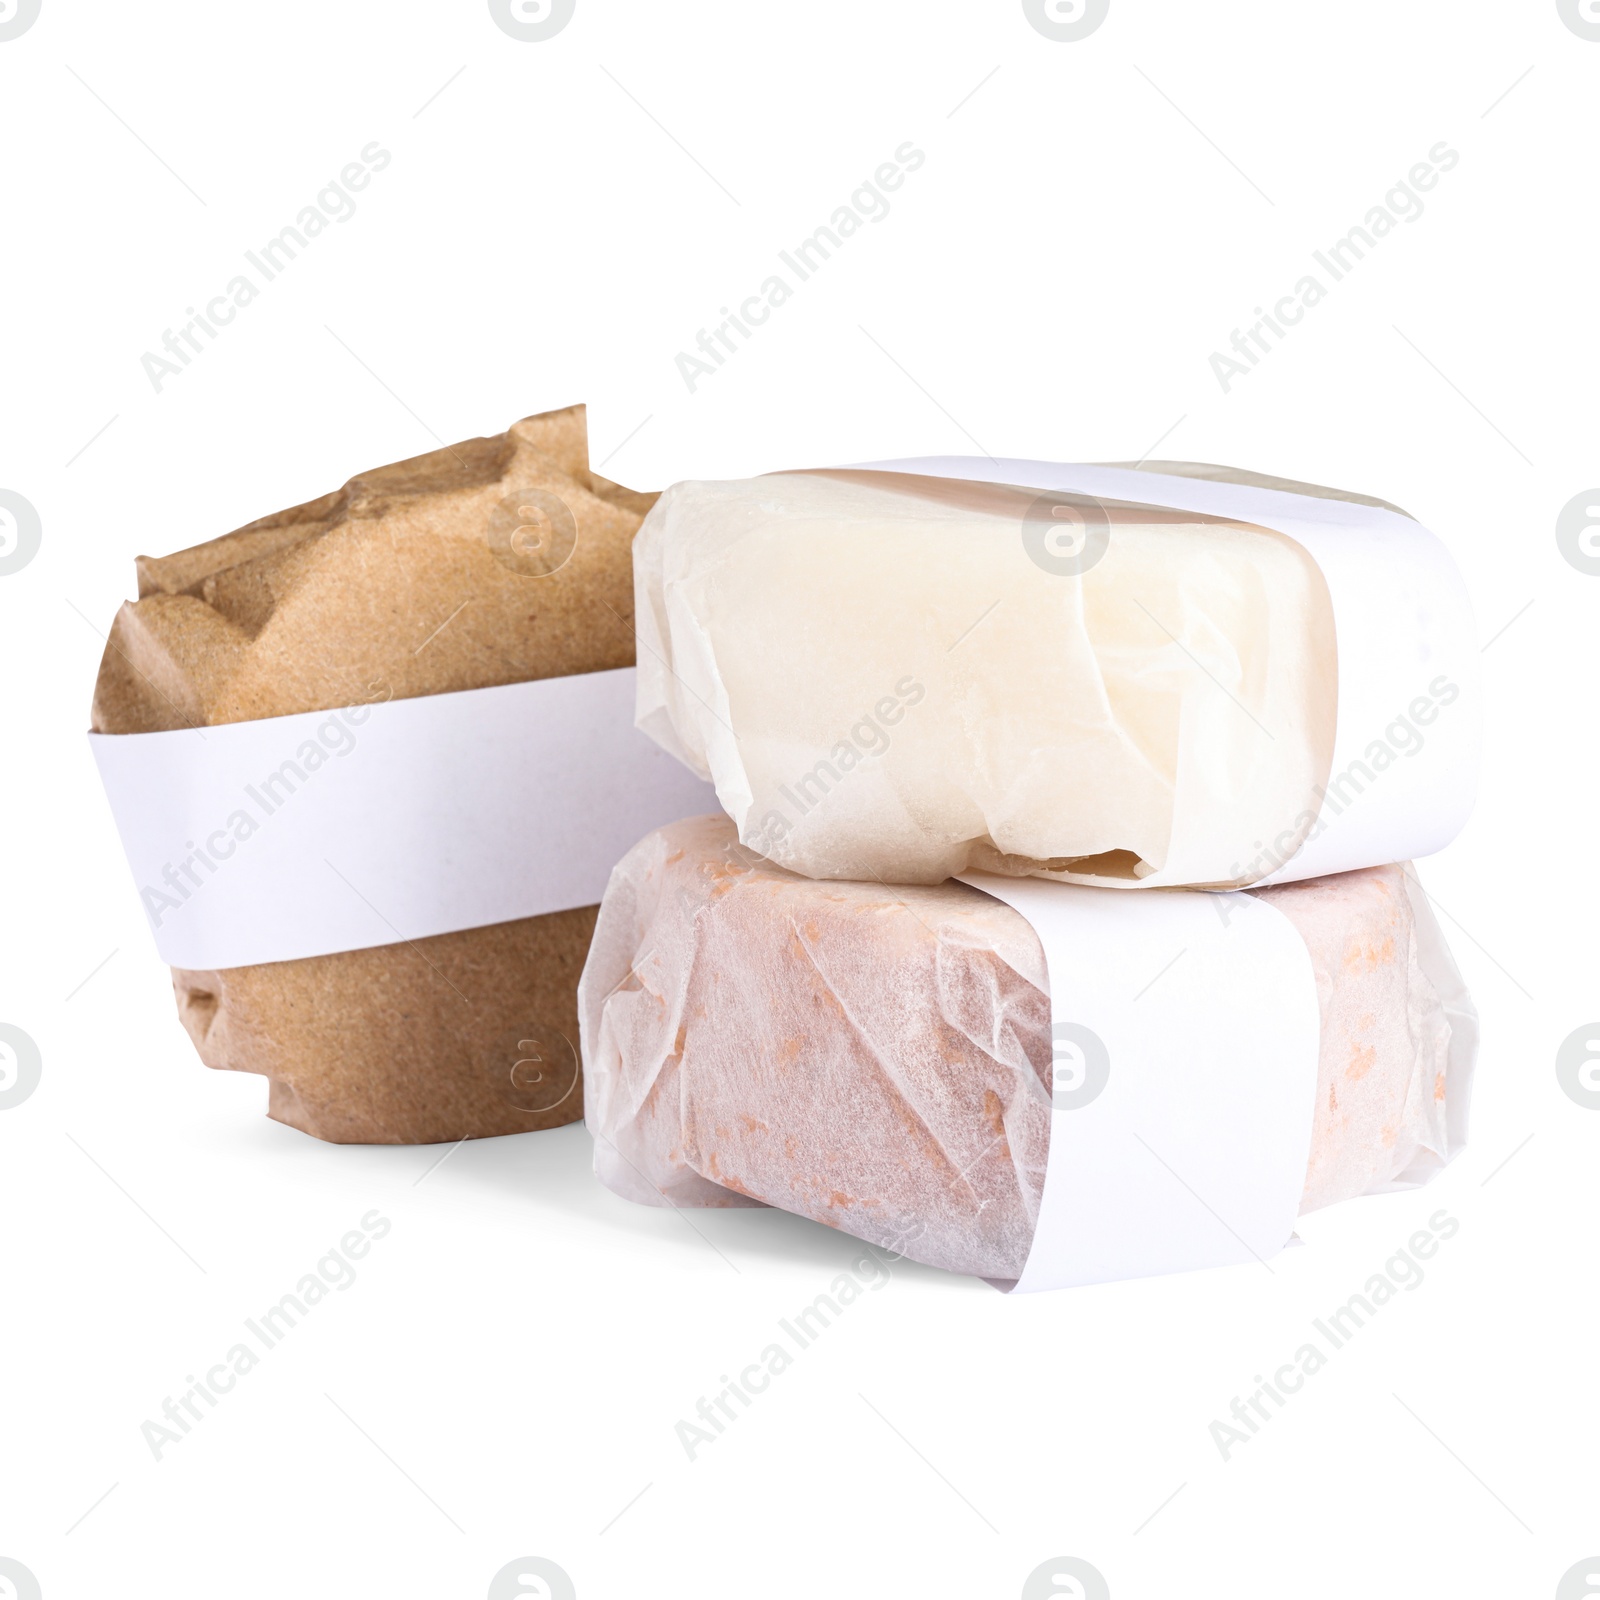 Photo of Solid shampoo bars wrapped in parchment on white background